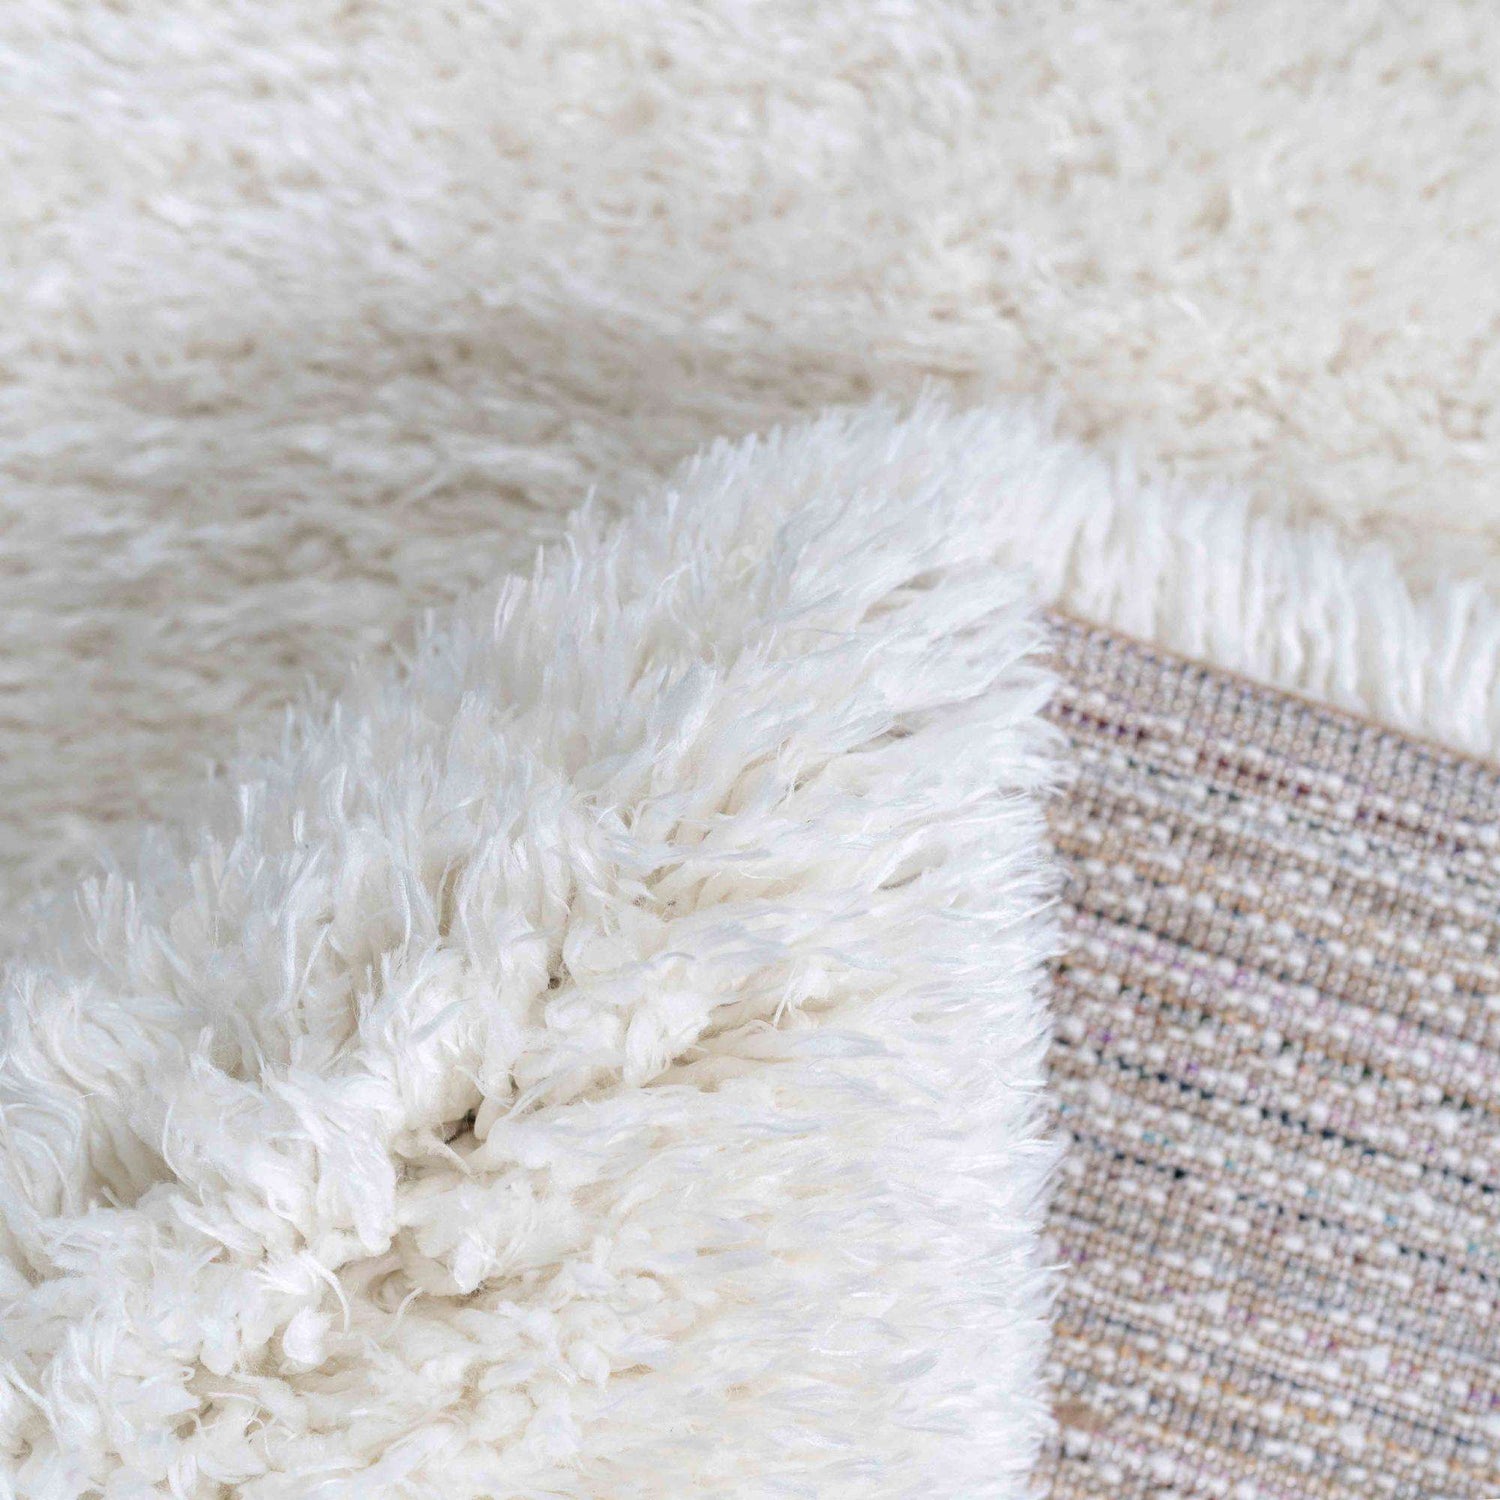 Deluxe Thick Soft Cream Shaggy Living Room Rug